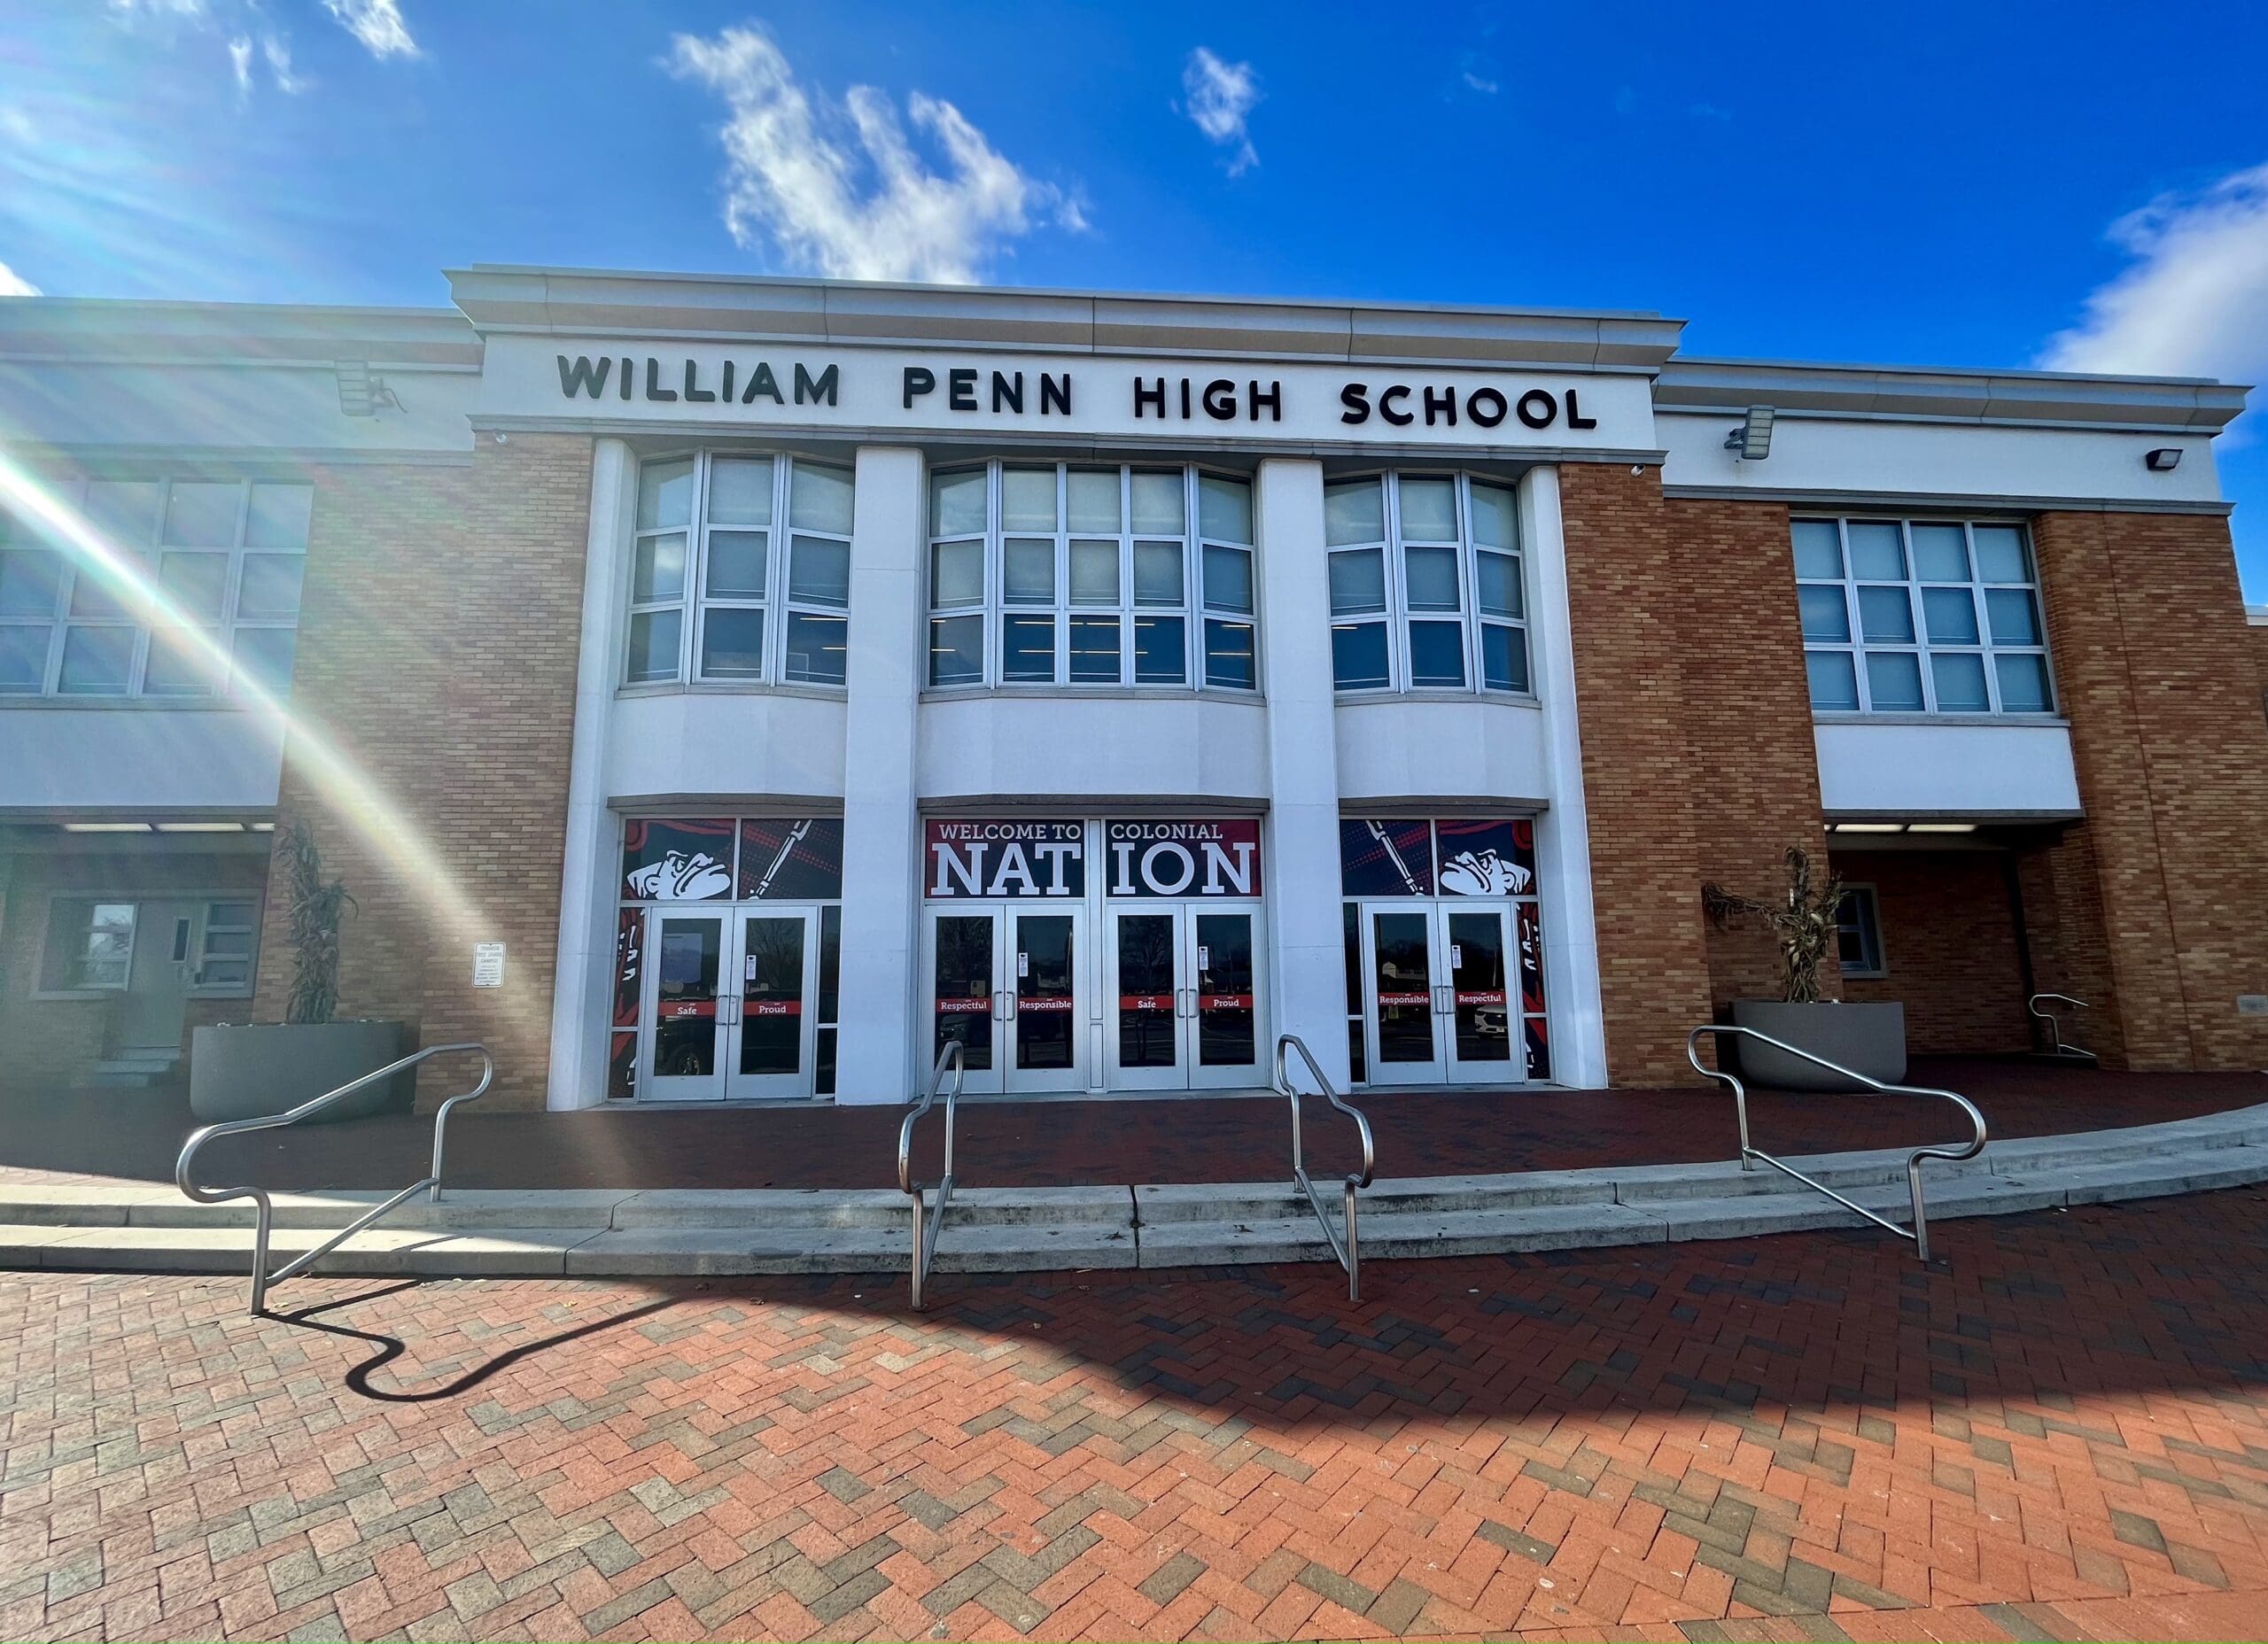 A 16-year-old has been arrested in connection with the shooting at William Penn High School last week. (Jarek Rutz/Delaware LIVE News)